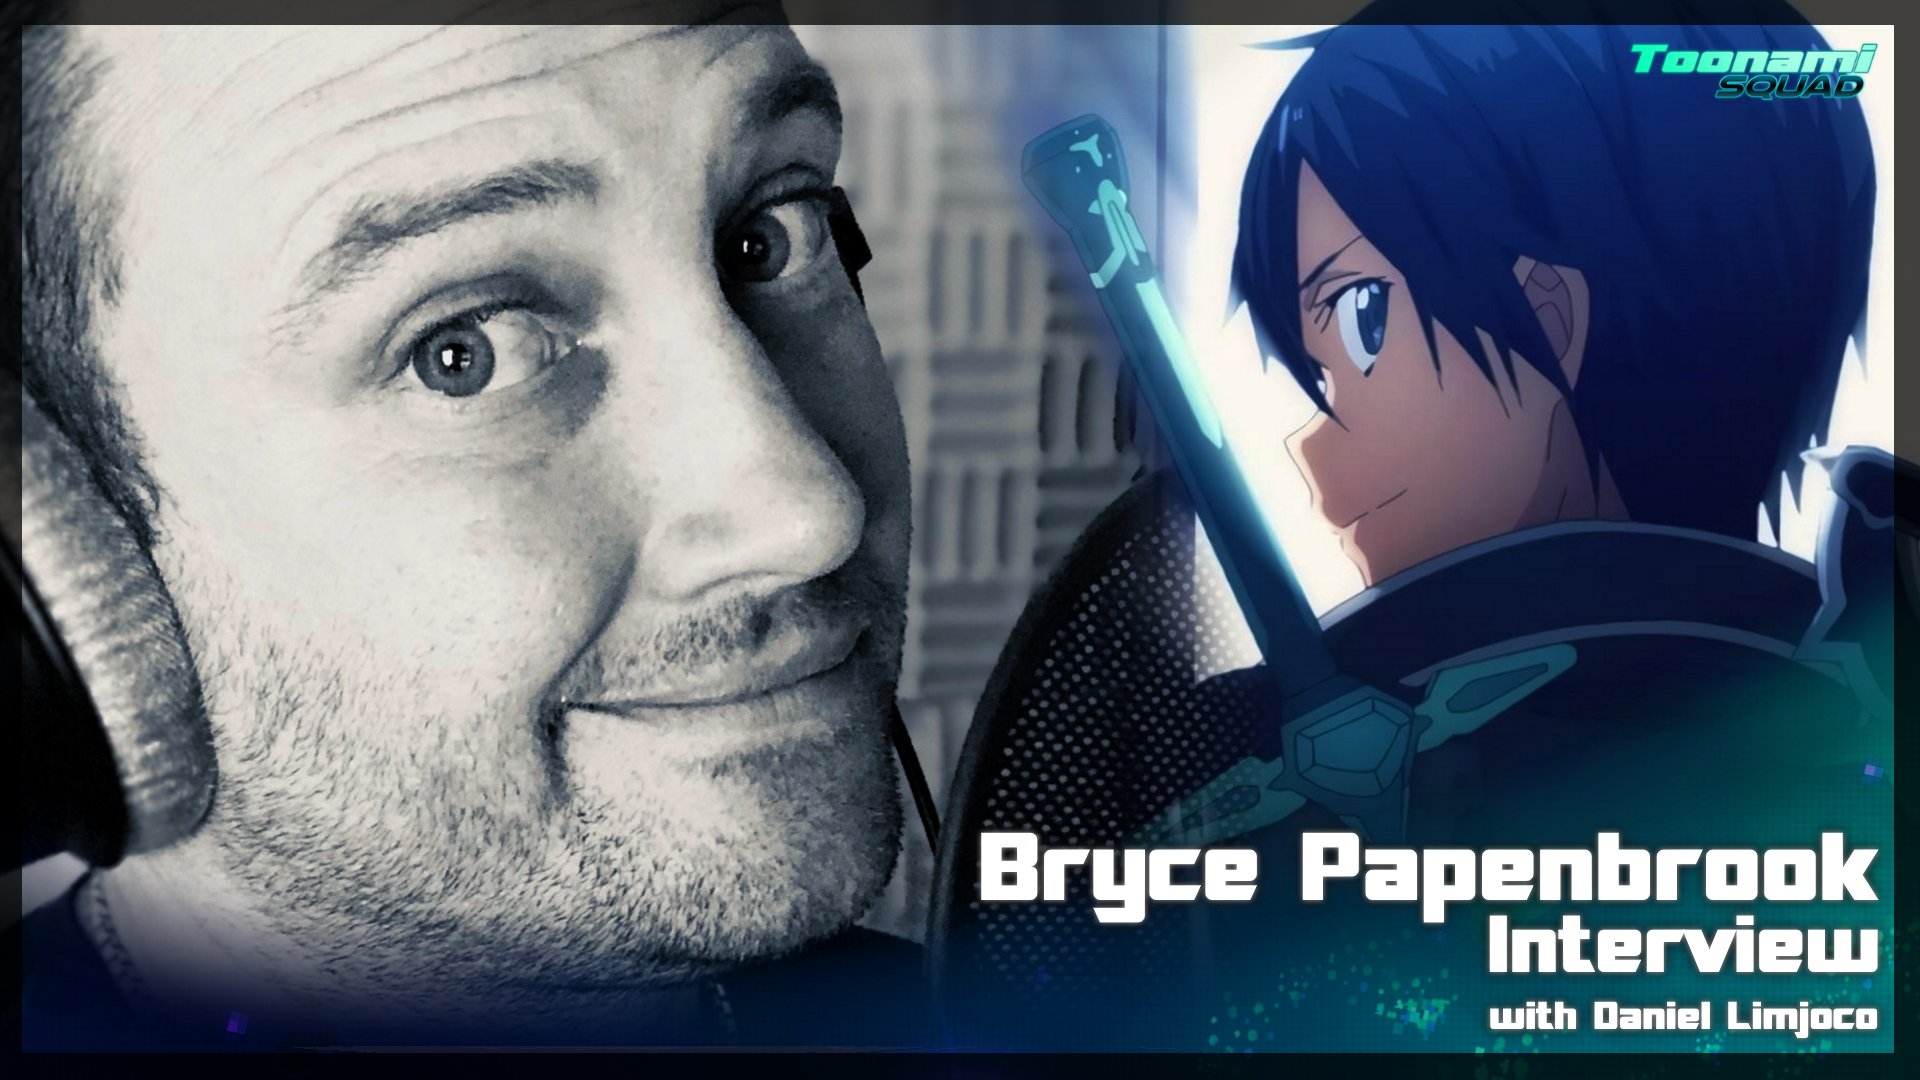 Toonami Squad interviews Bryce Papenbrook at San Diego Comic-Con: Special Edition